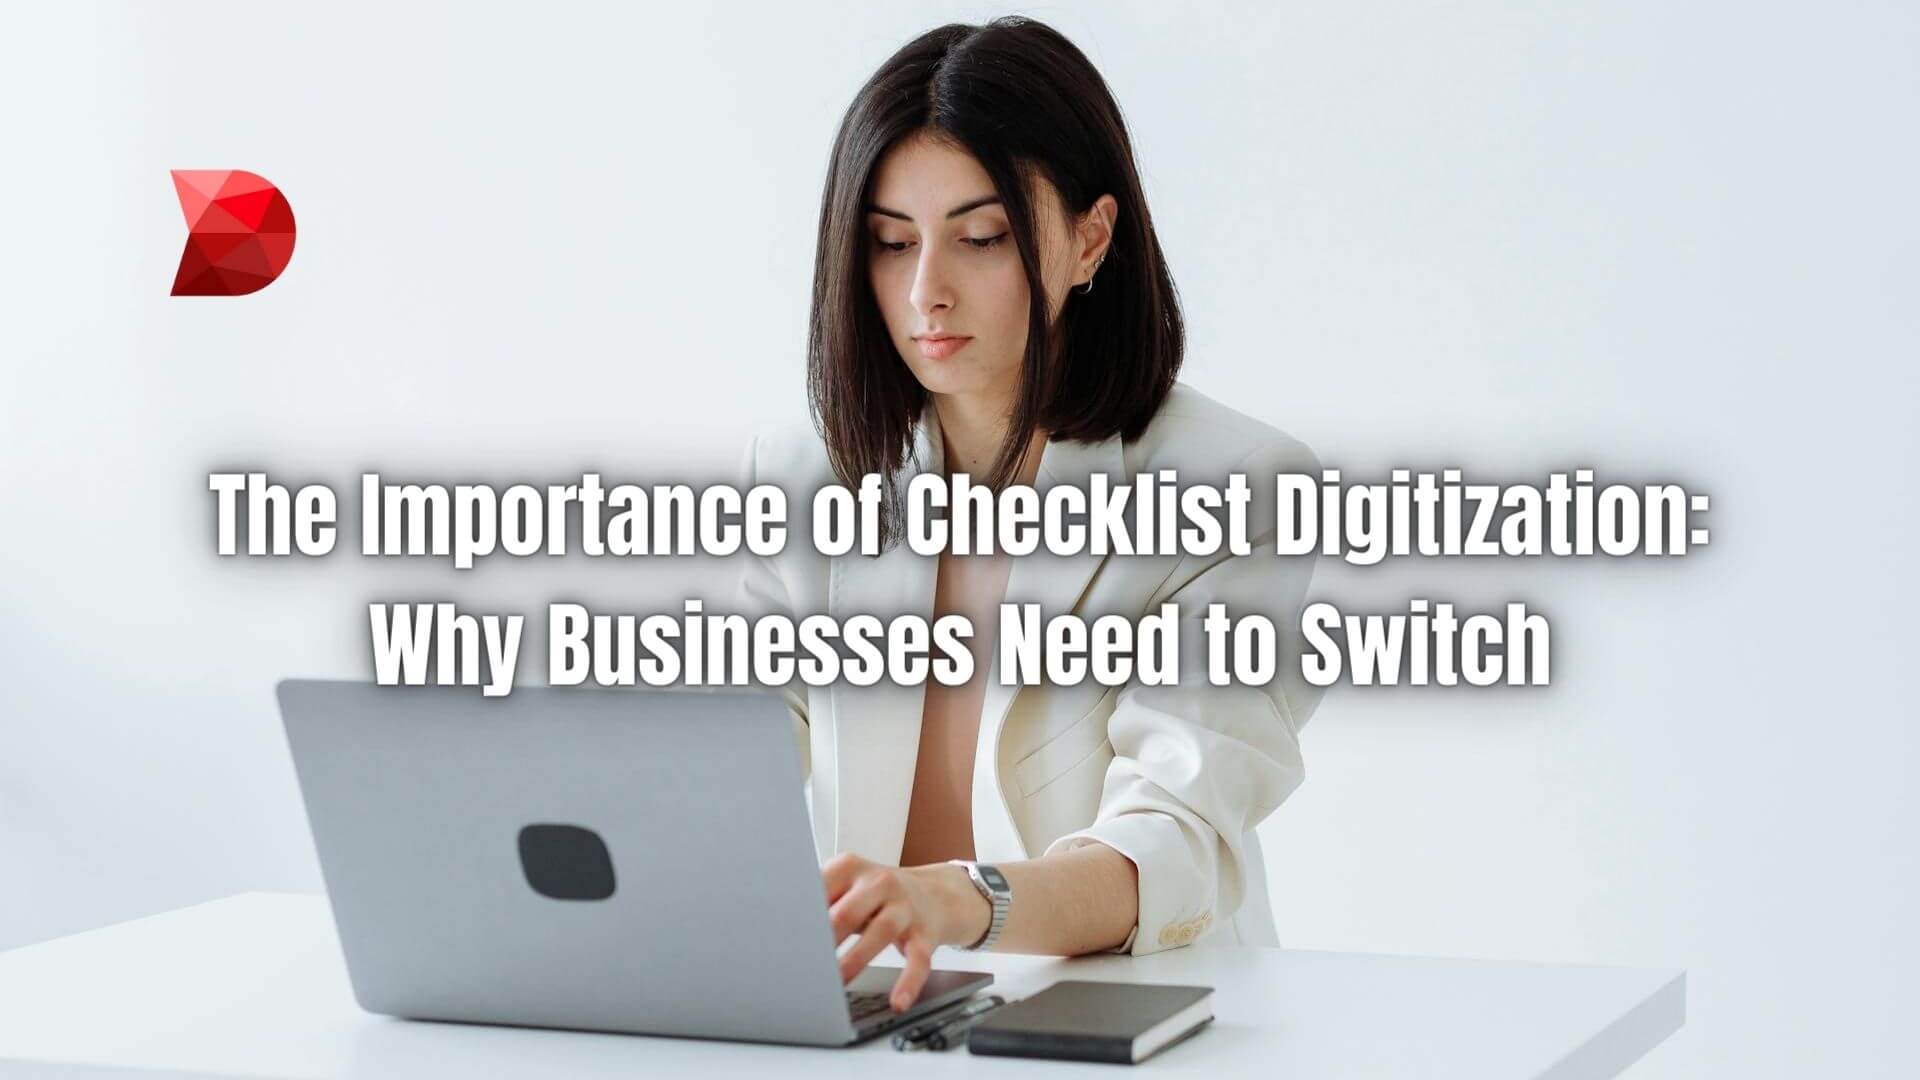 Discover the transformative power of checklist digitization! Learn why businesses need to switch for enhanced efficiency and productivity.